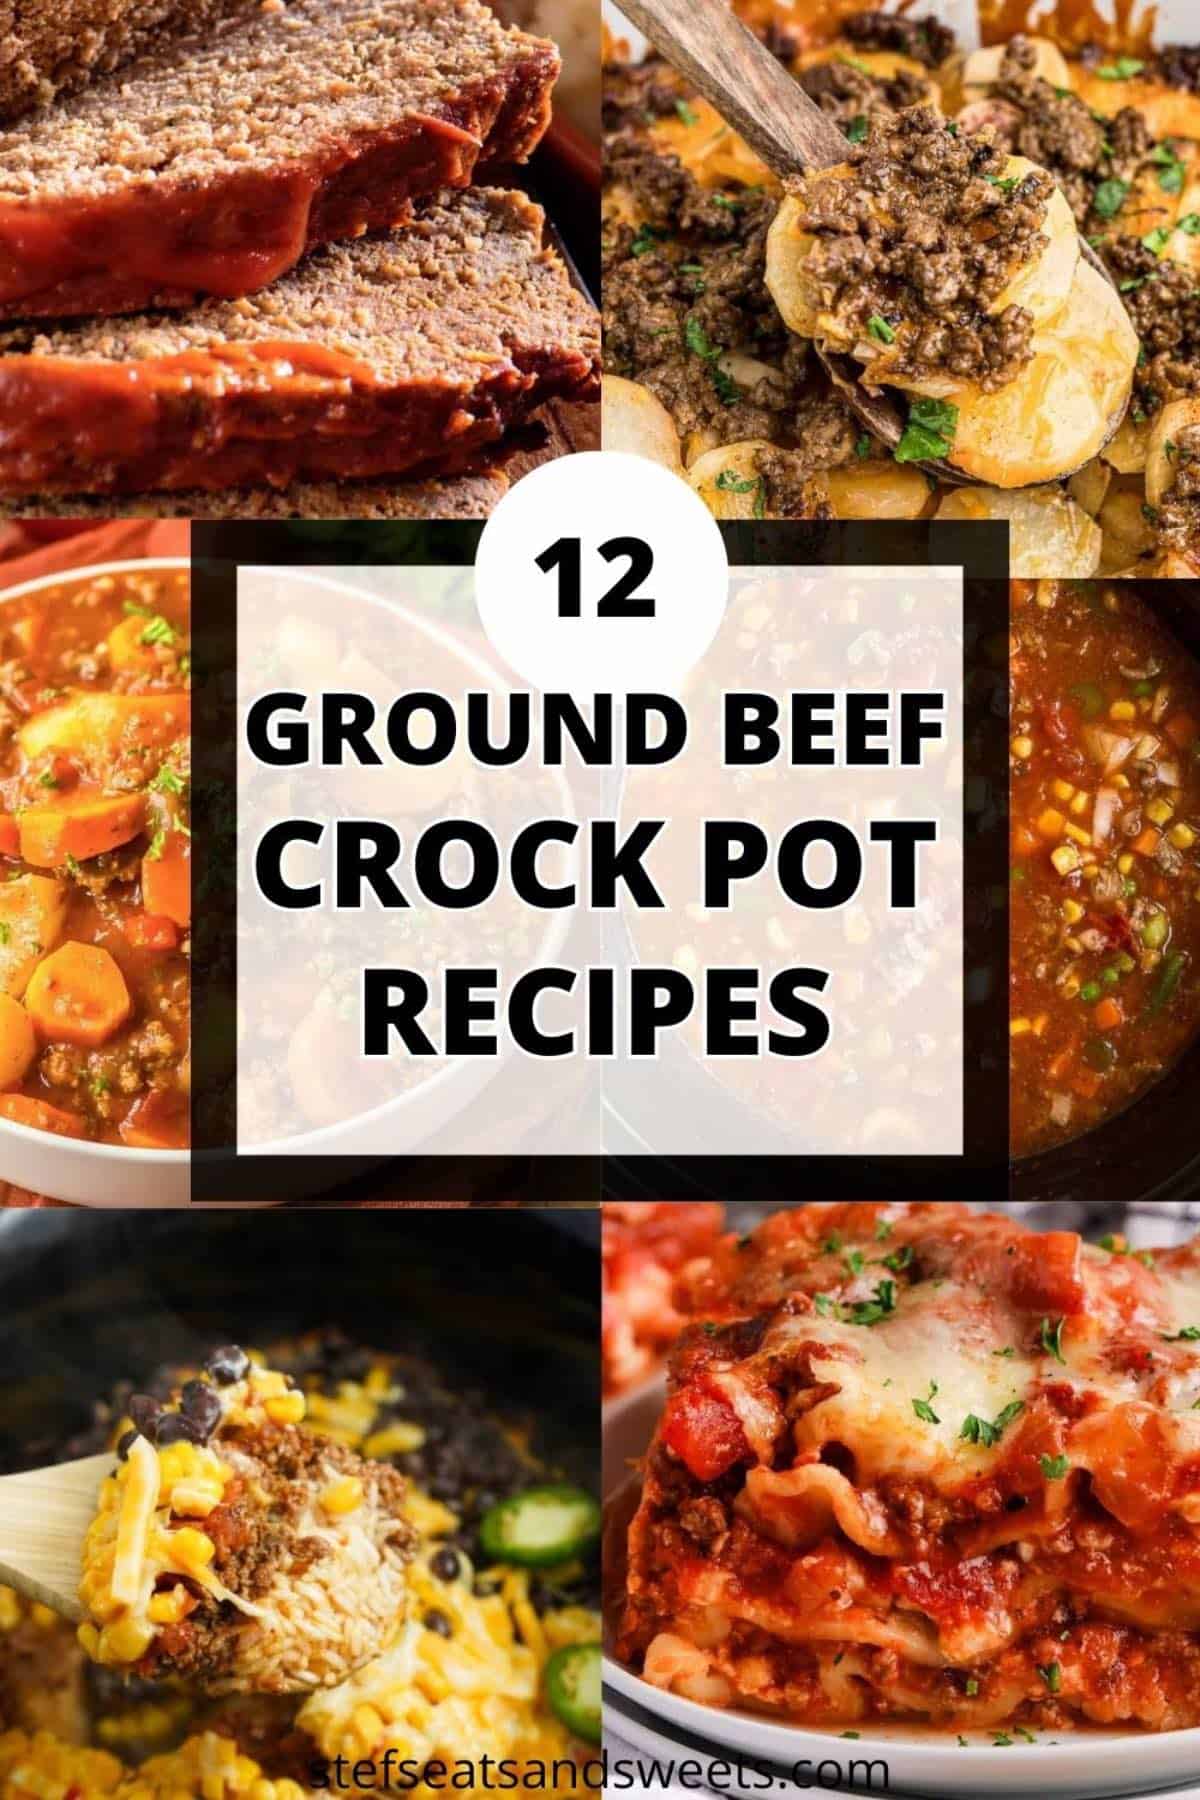 12 Ground Beef Crock Pot Recipes collage with text. 